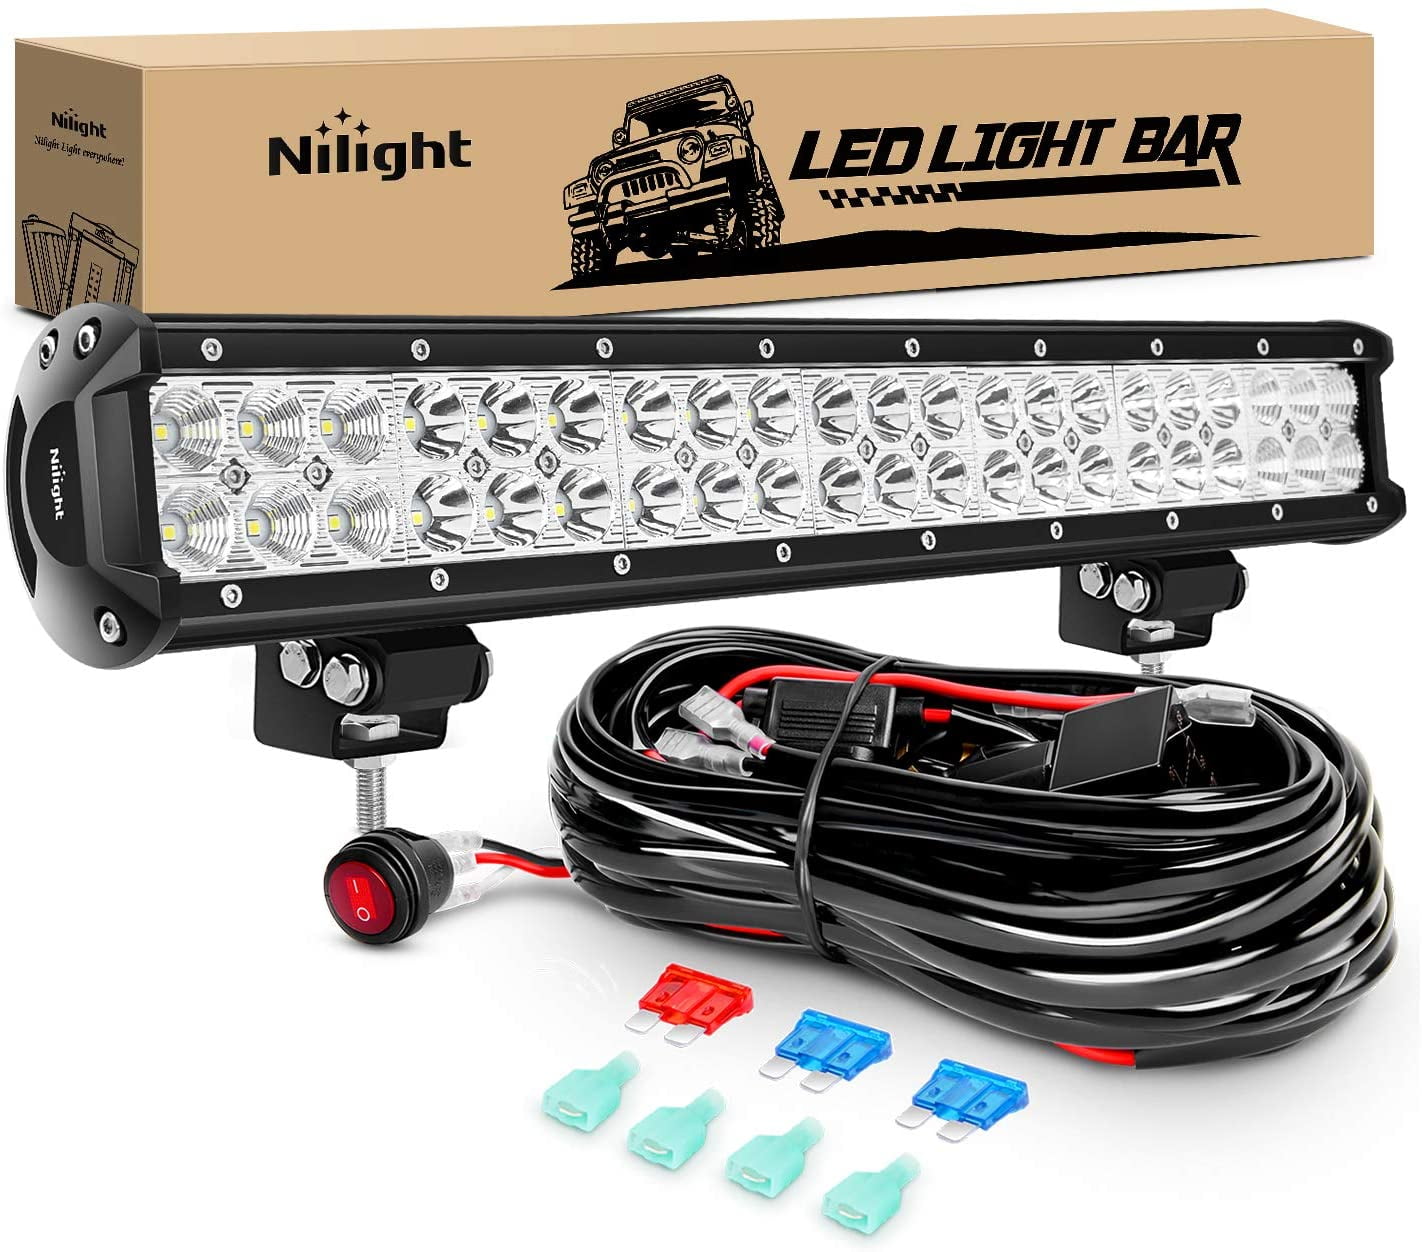  Willpower 20 inch 126W Spot Flood Combo LED Work Light Bar with  Wiring Harness Kit for Truck Car ATV SUV 4X4 4WD Jeep Truck Driving Lamp :  Automotive